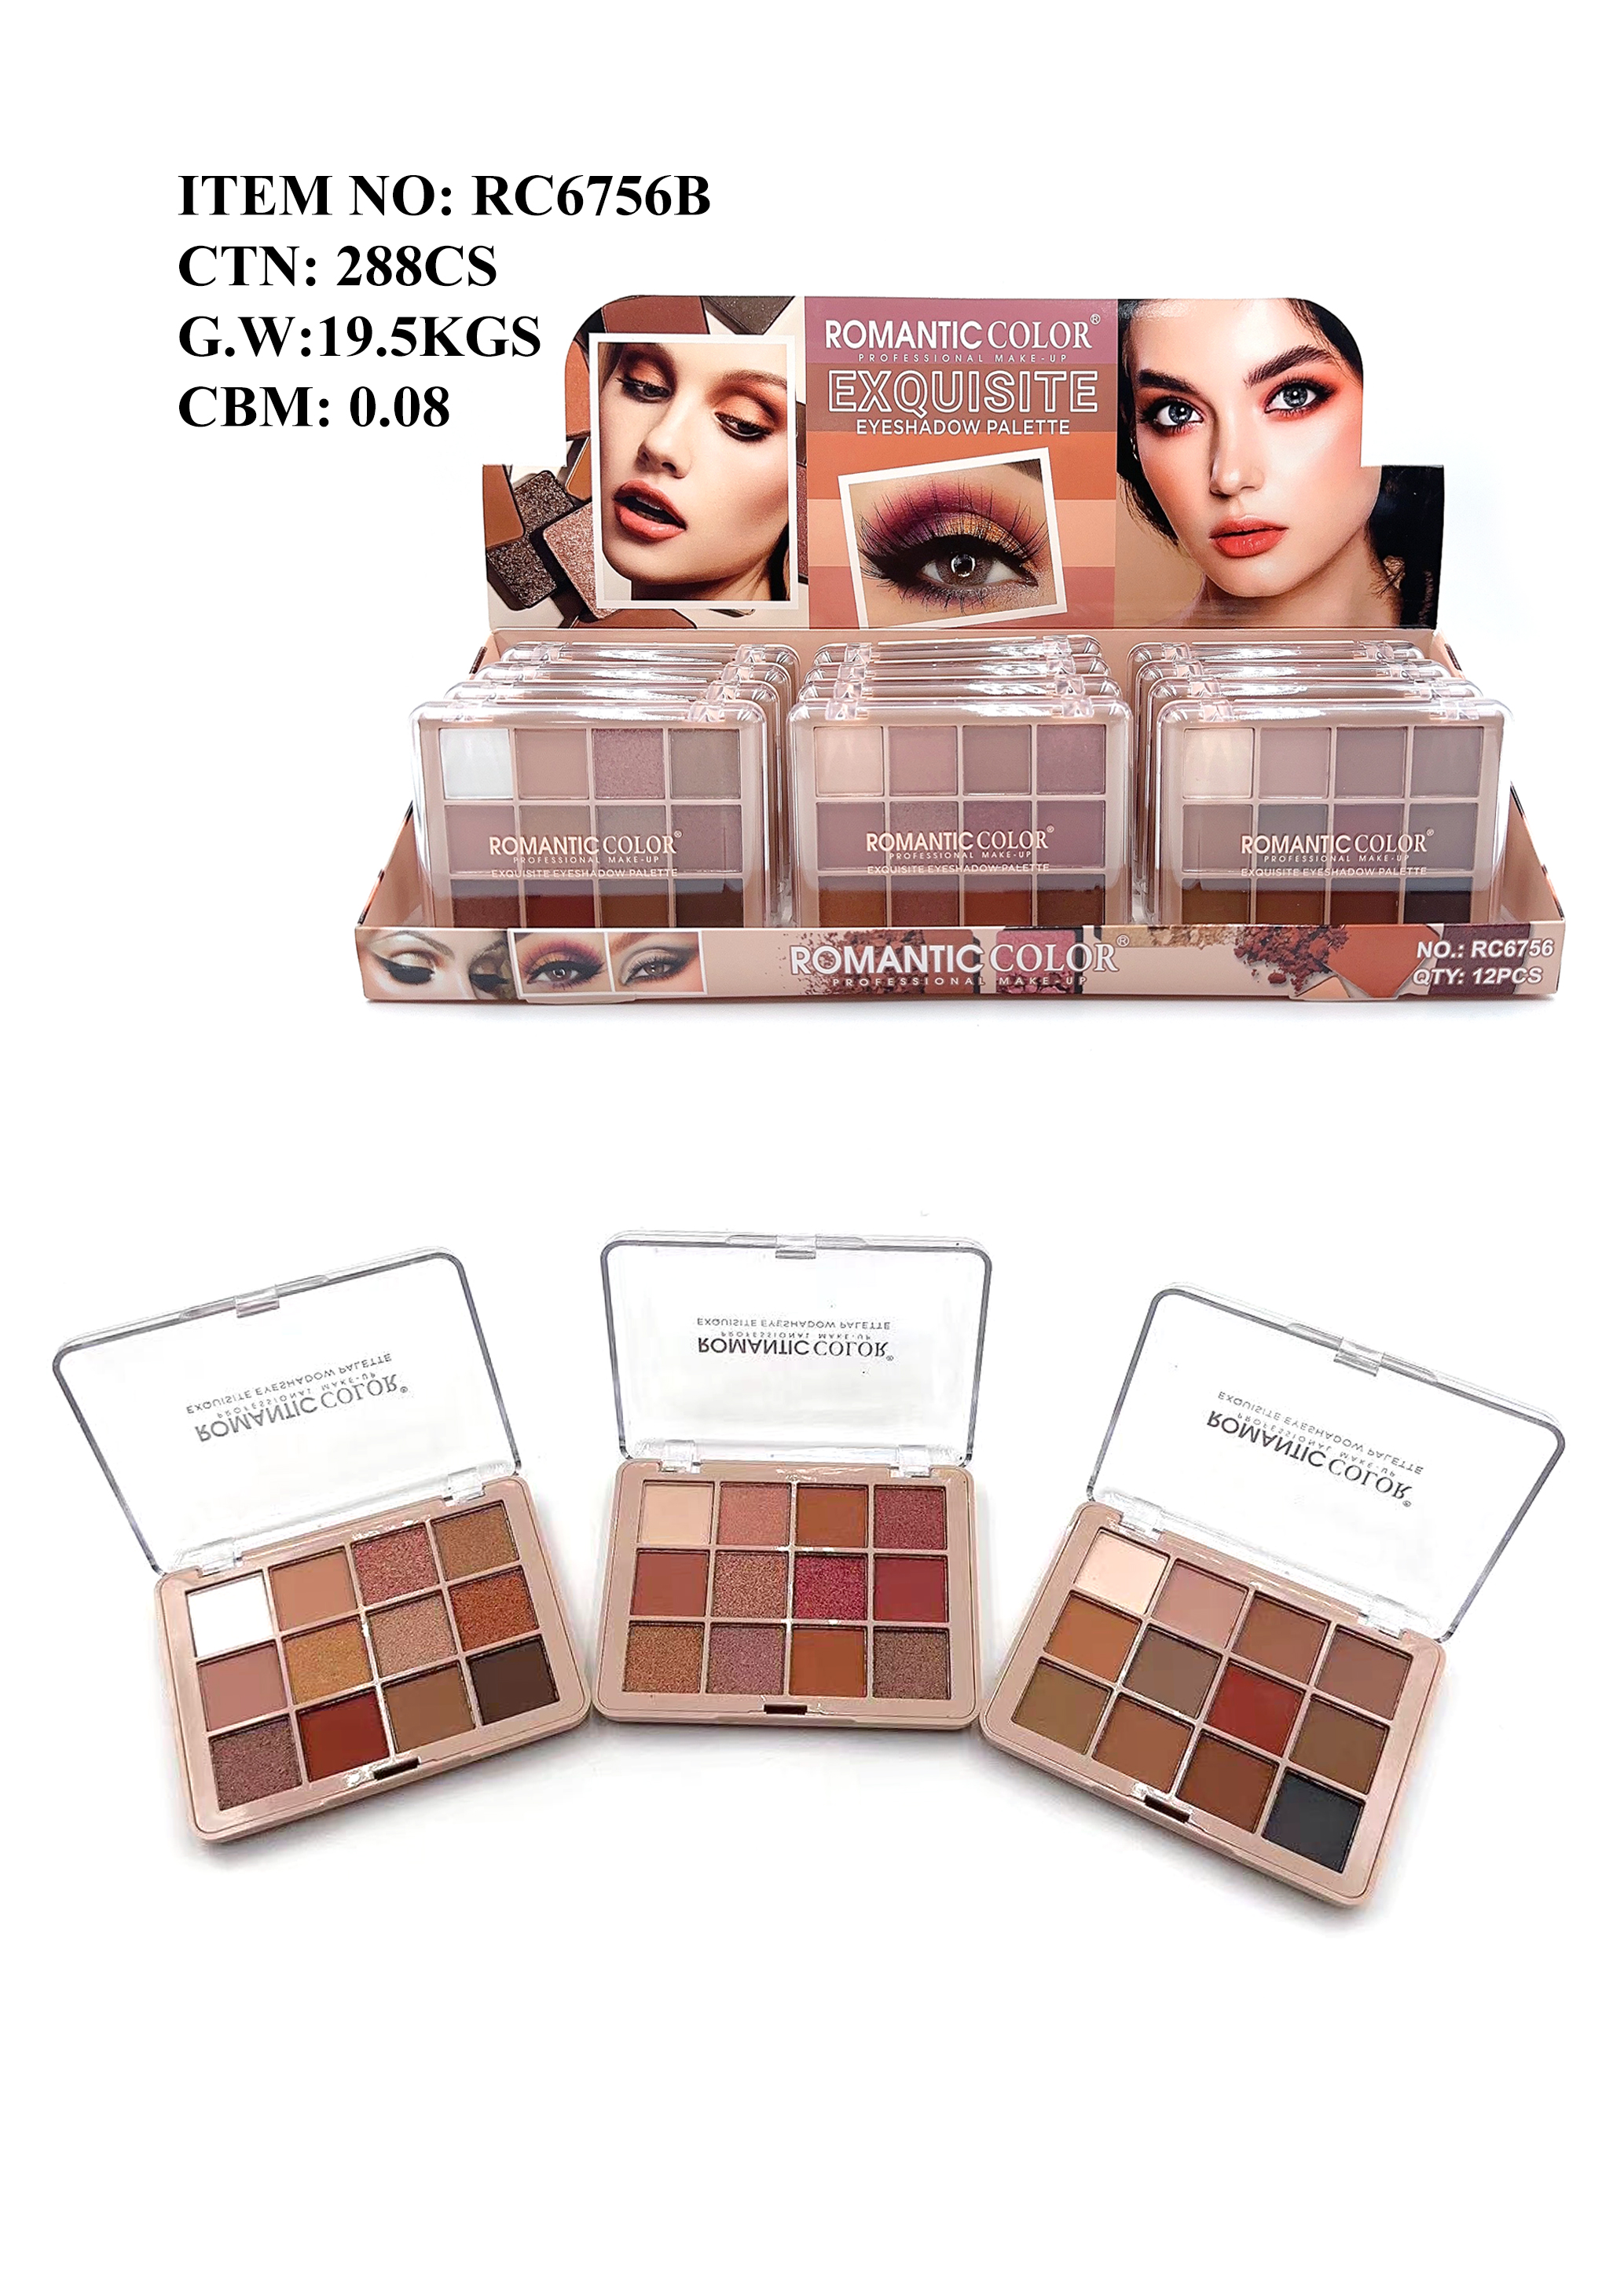 ROMANTIC COLOR EXQUISITE EYESHADOW POWDER|12 COLORS EYESHADOW PALETTE